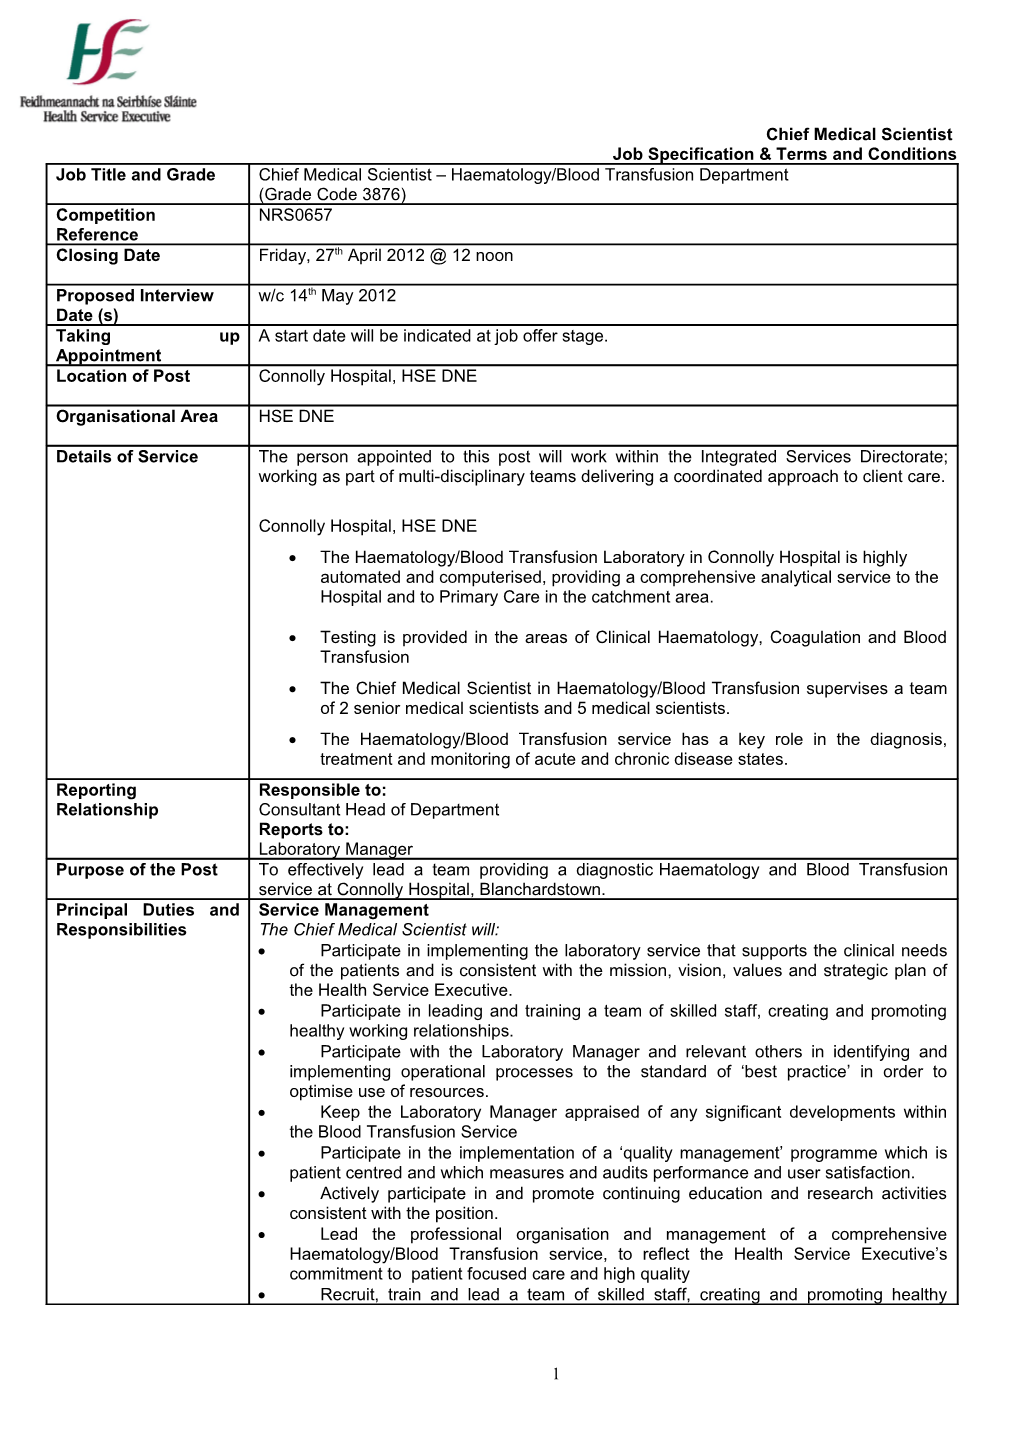 Job Specification & Terms and Conditions s7